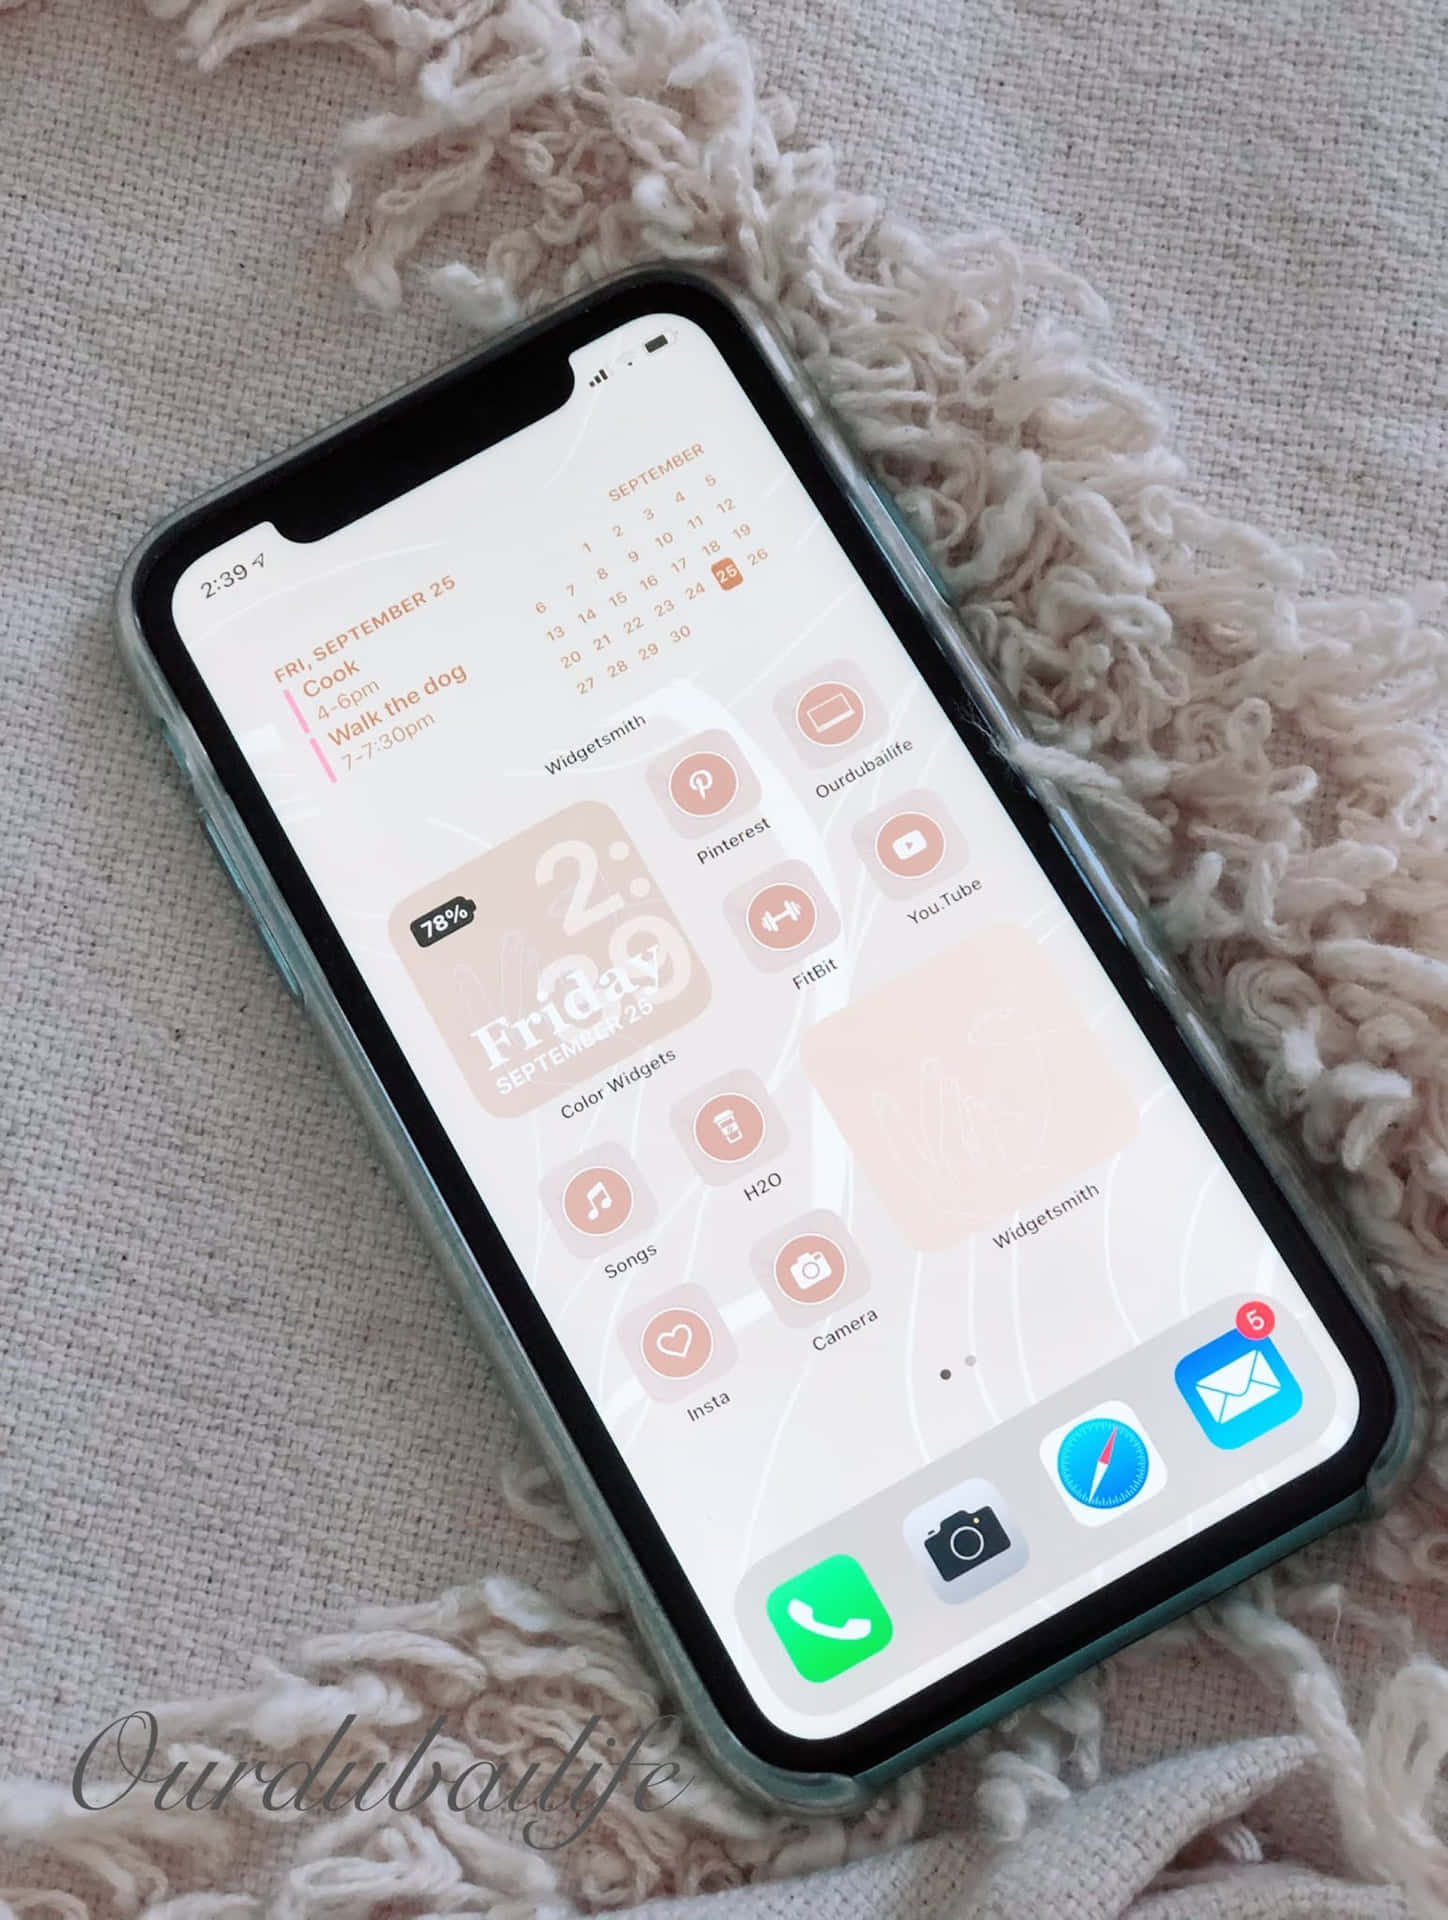 Enjoy the simple elegance of your iPhone's aesthetic